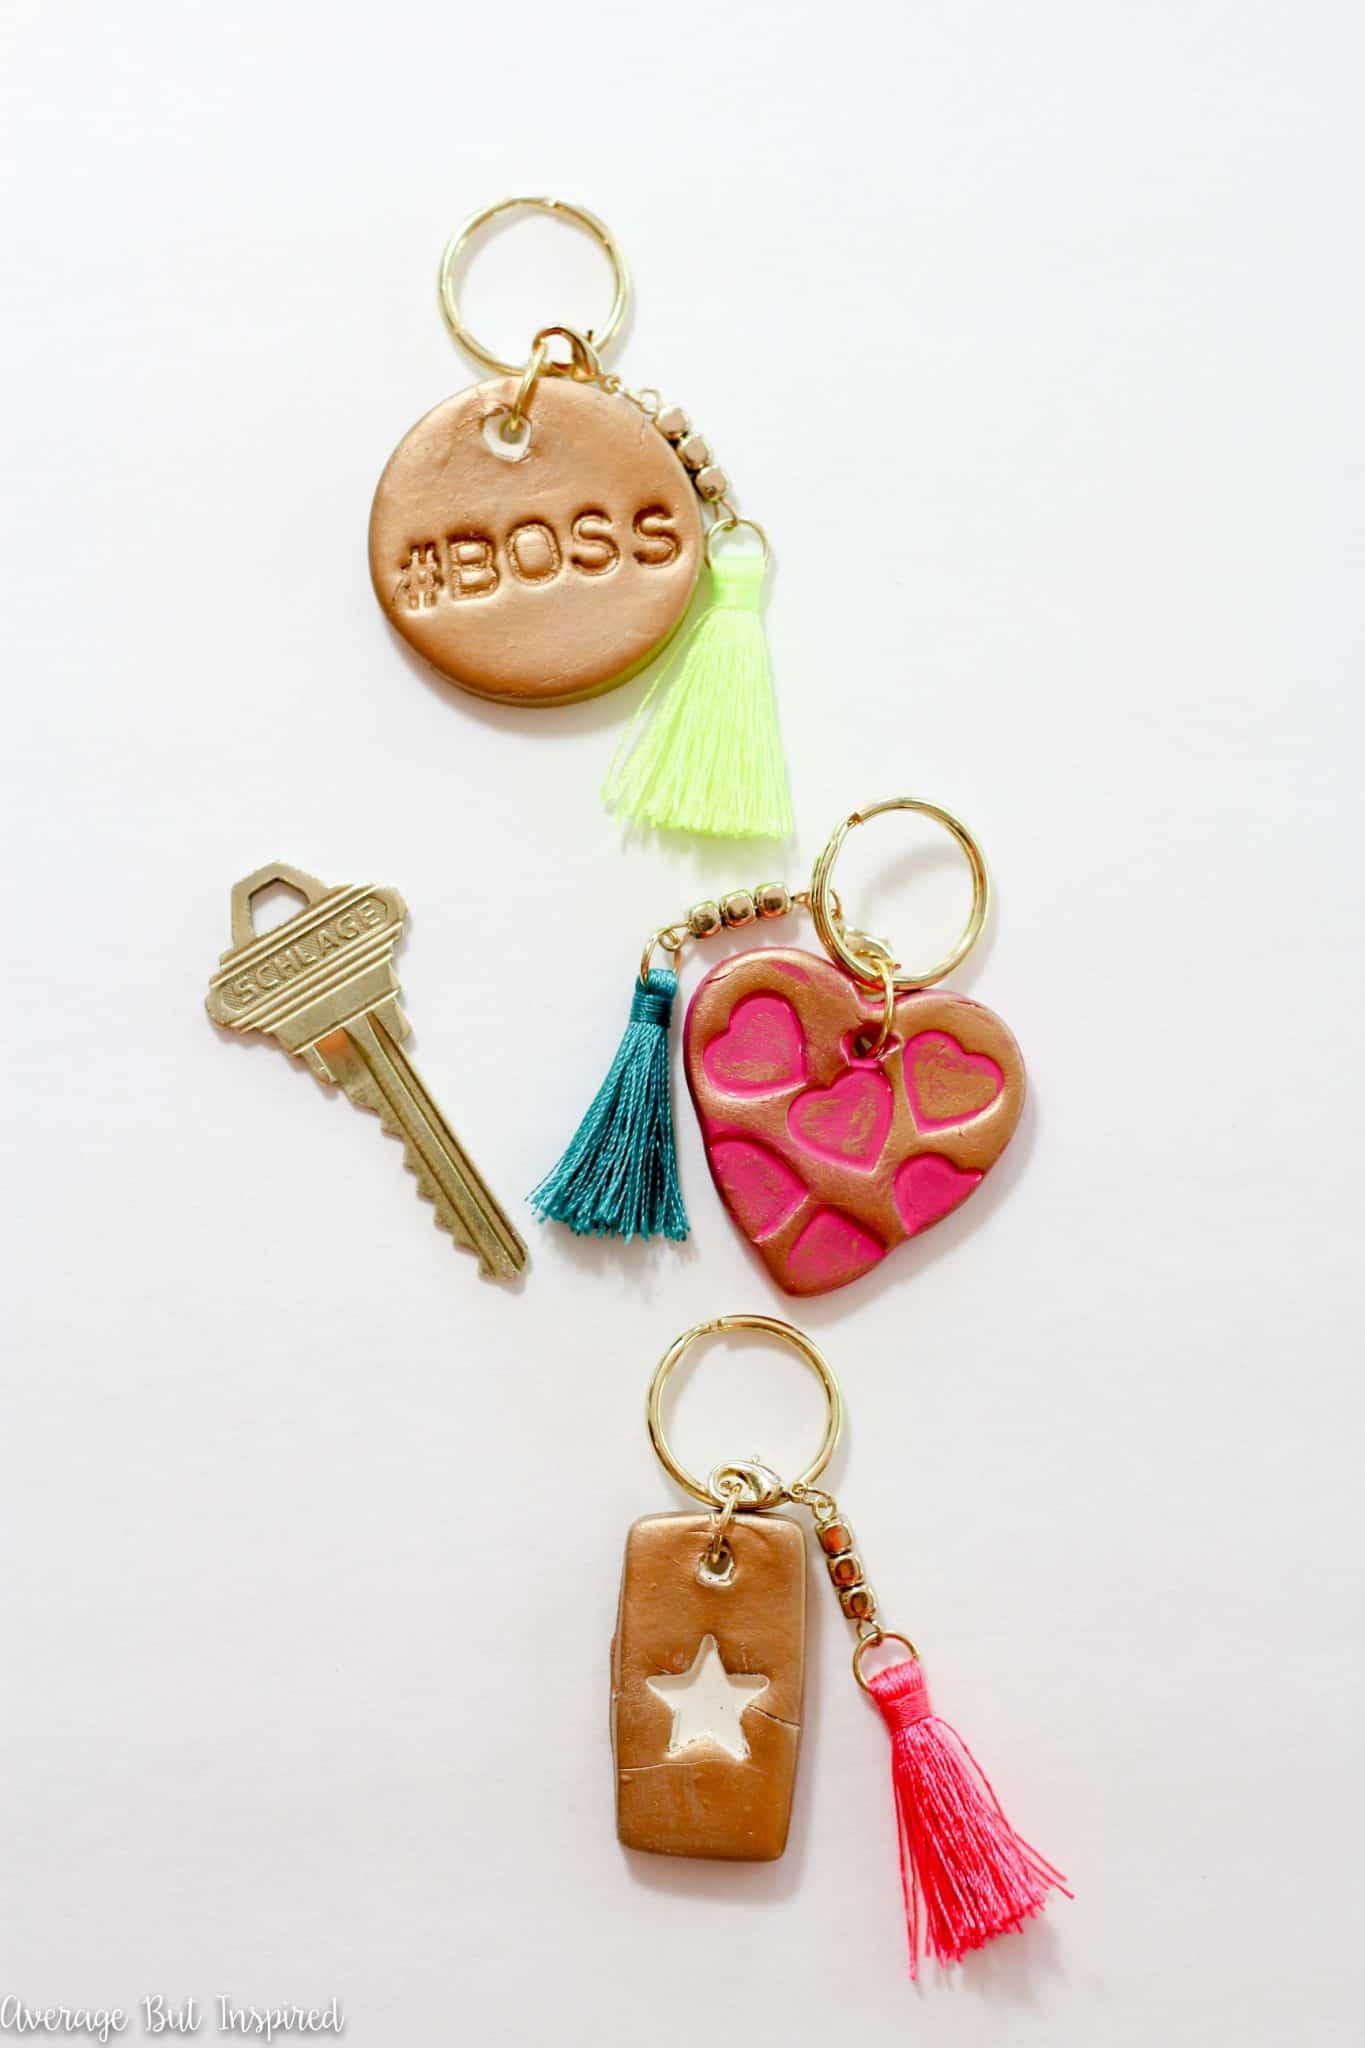 Air dry clay keychains are a fun and simple craft that anyone can make! Plus, they make a great DIY gift!